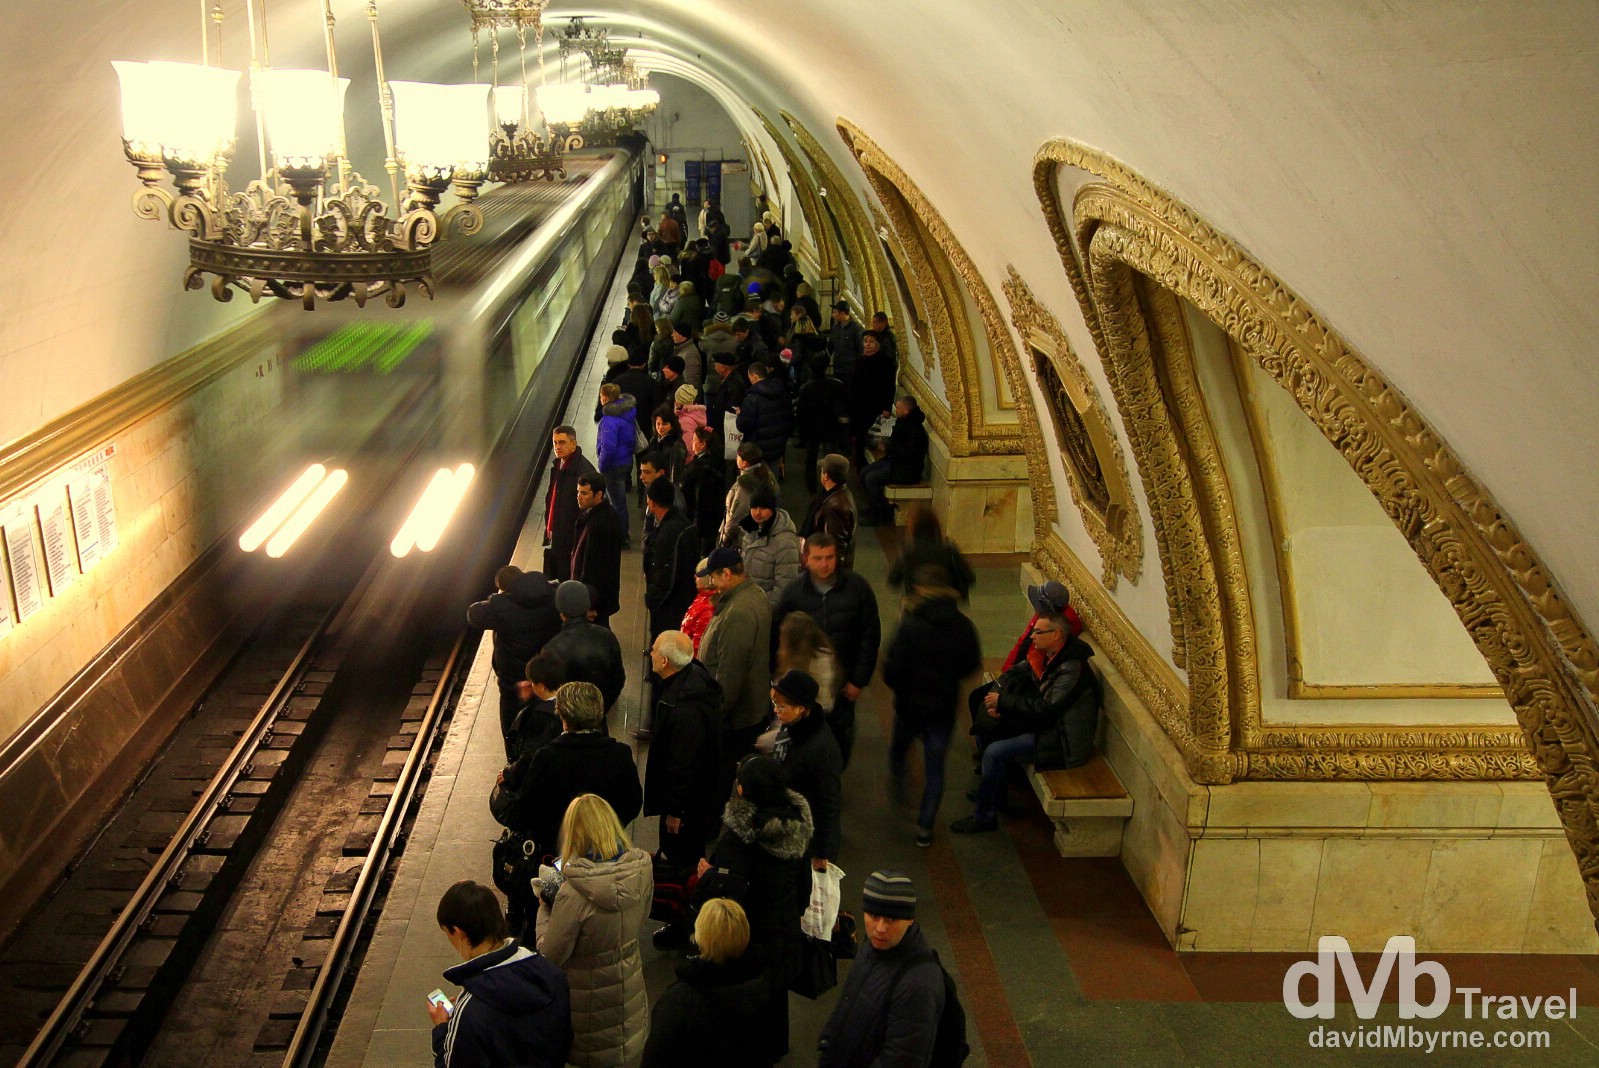 A train entering Kievskaya Metro Station of the Moscow Metro system, Moscow, Russia. November 20th 2012.